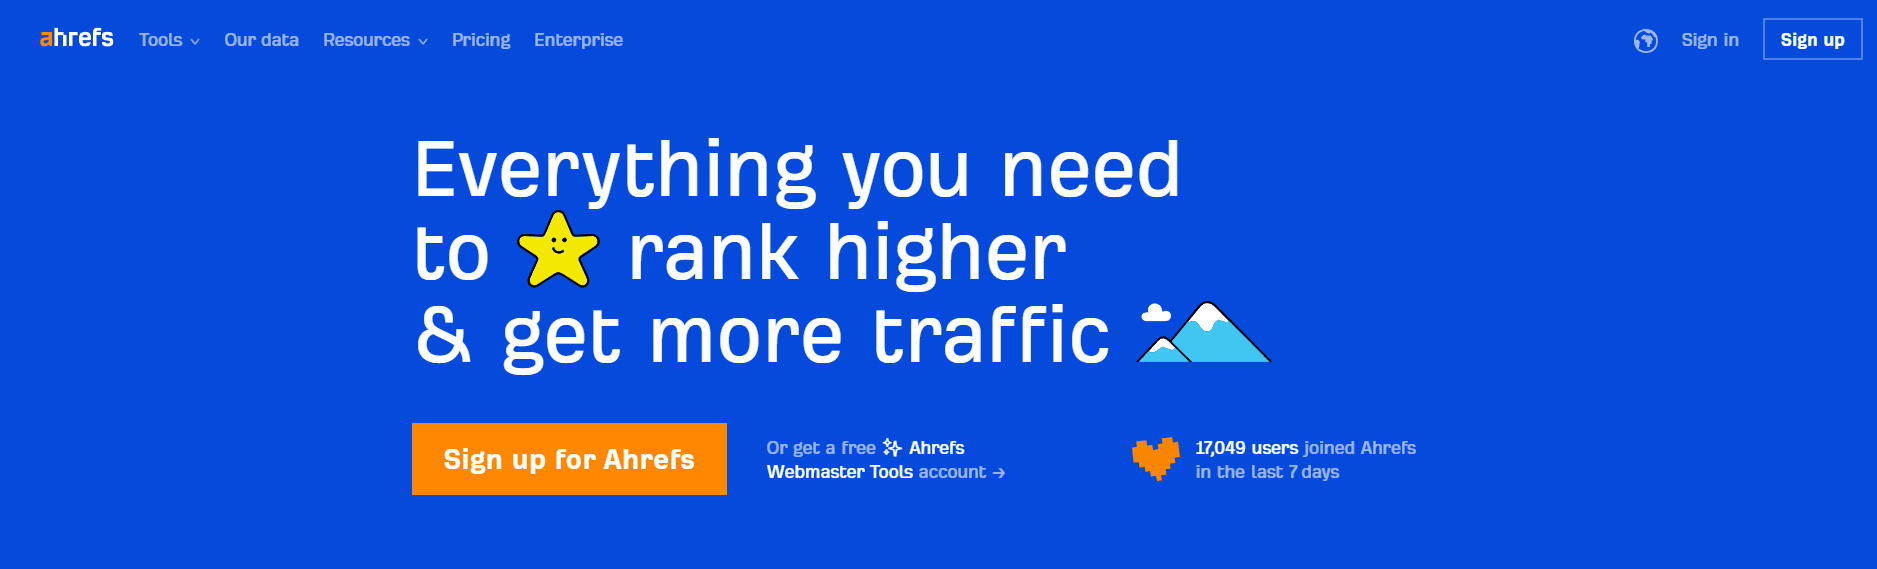 Ahrefs tools to spy on your competitors